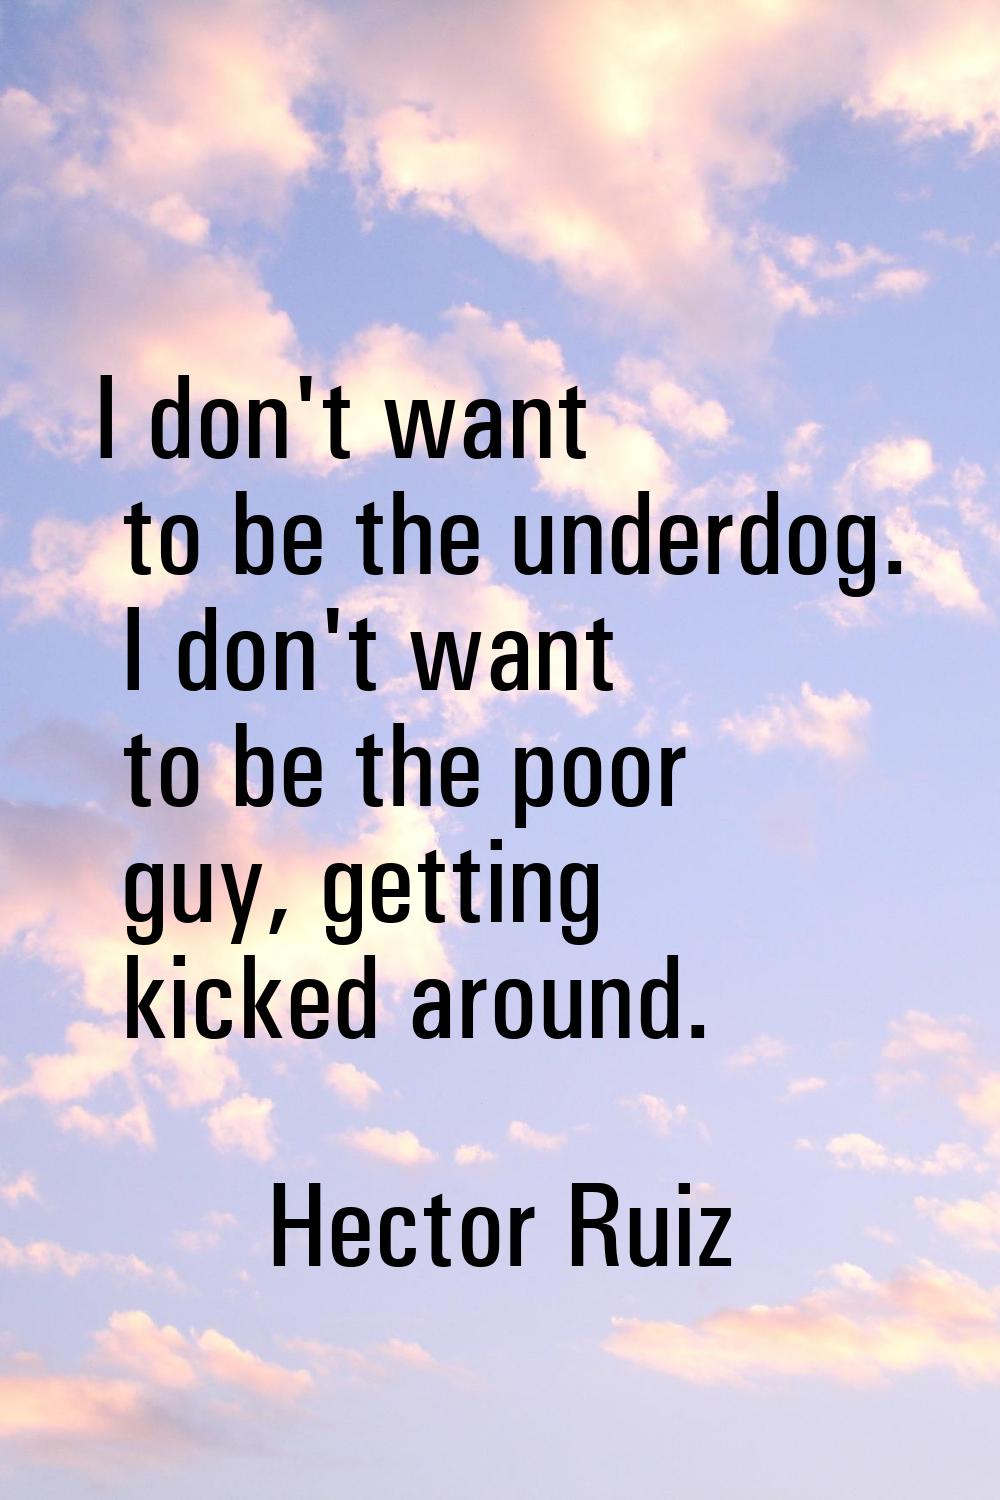 I don't want to be the underdog. I don't want to be the poor guy, getting kicked around.